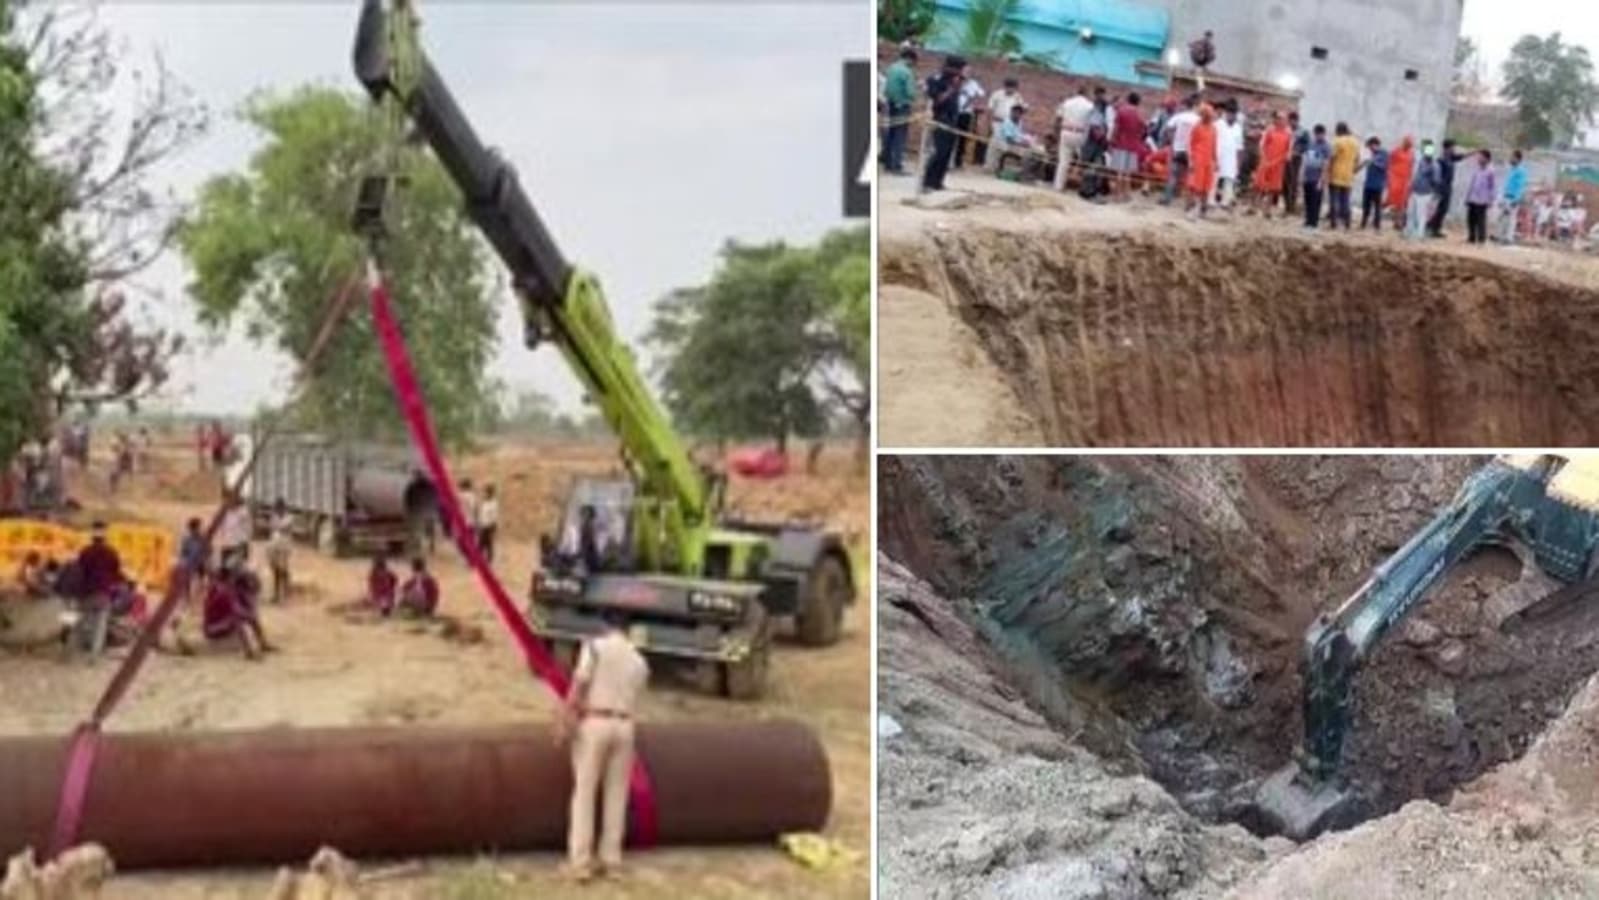 In Chhattisgarh, 3 days on, rescue ops on to save boy, 11. He fell in  borewell | Latest News India - Hindustan Times